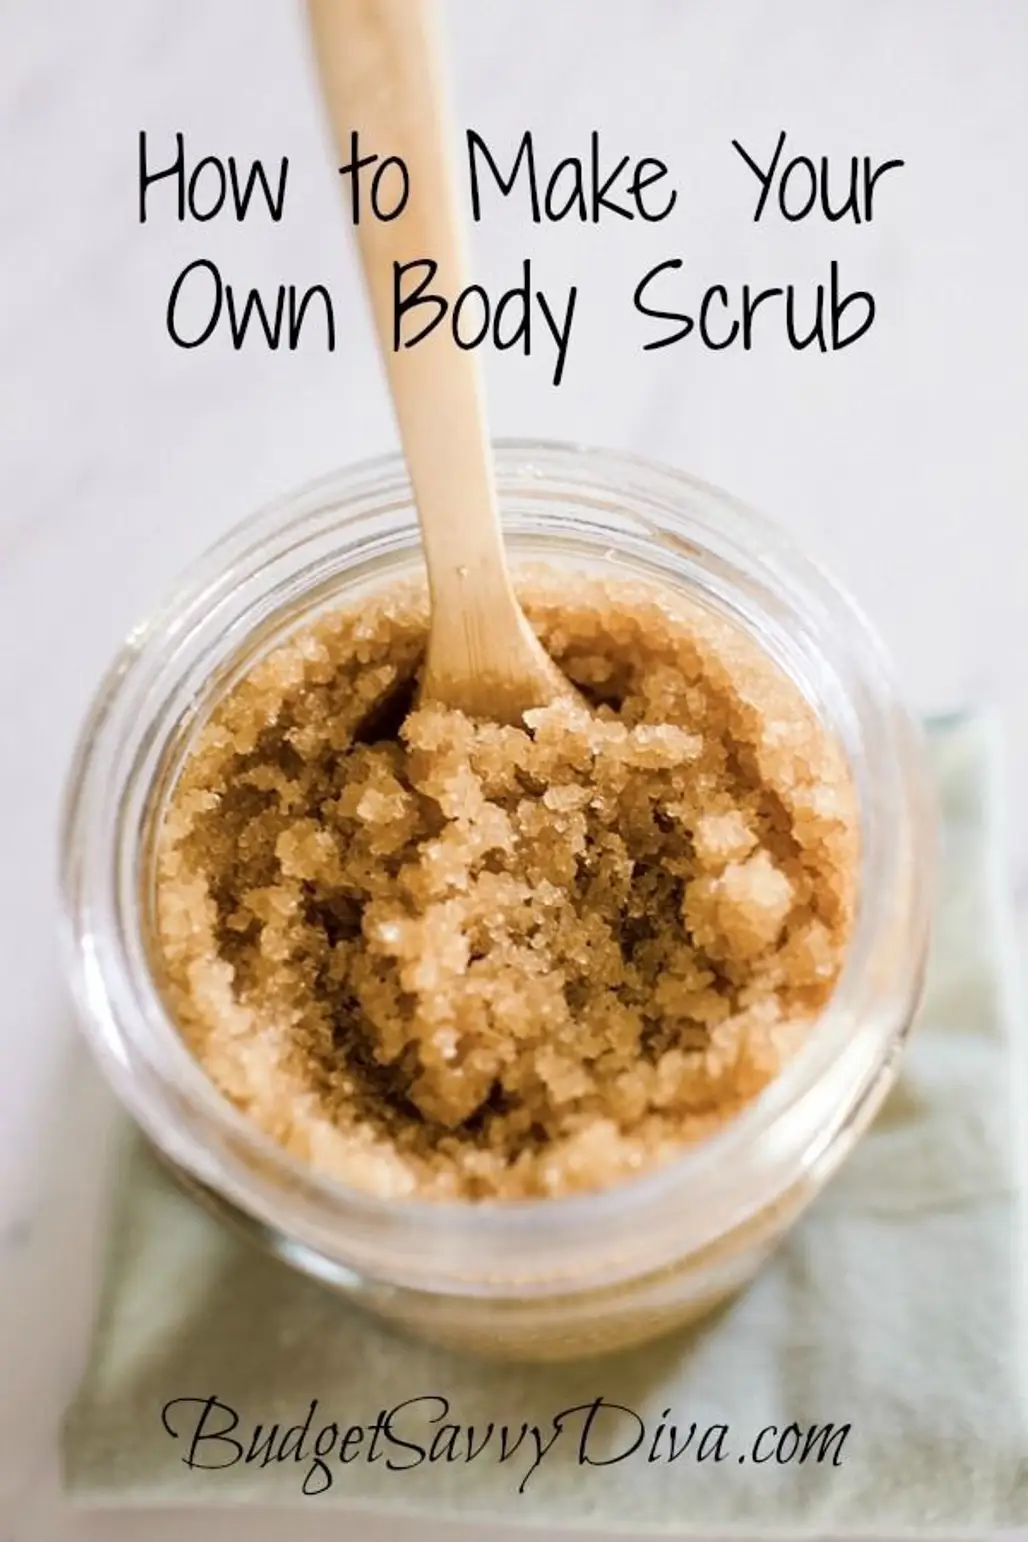 How to Make Your Own Body Scrub